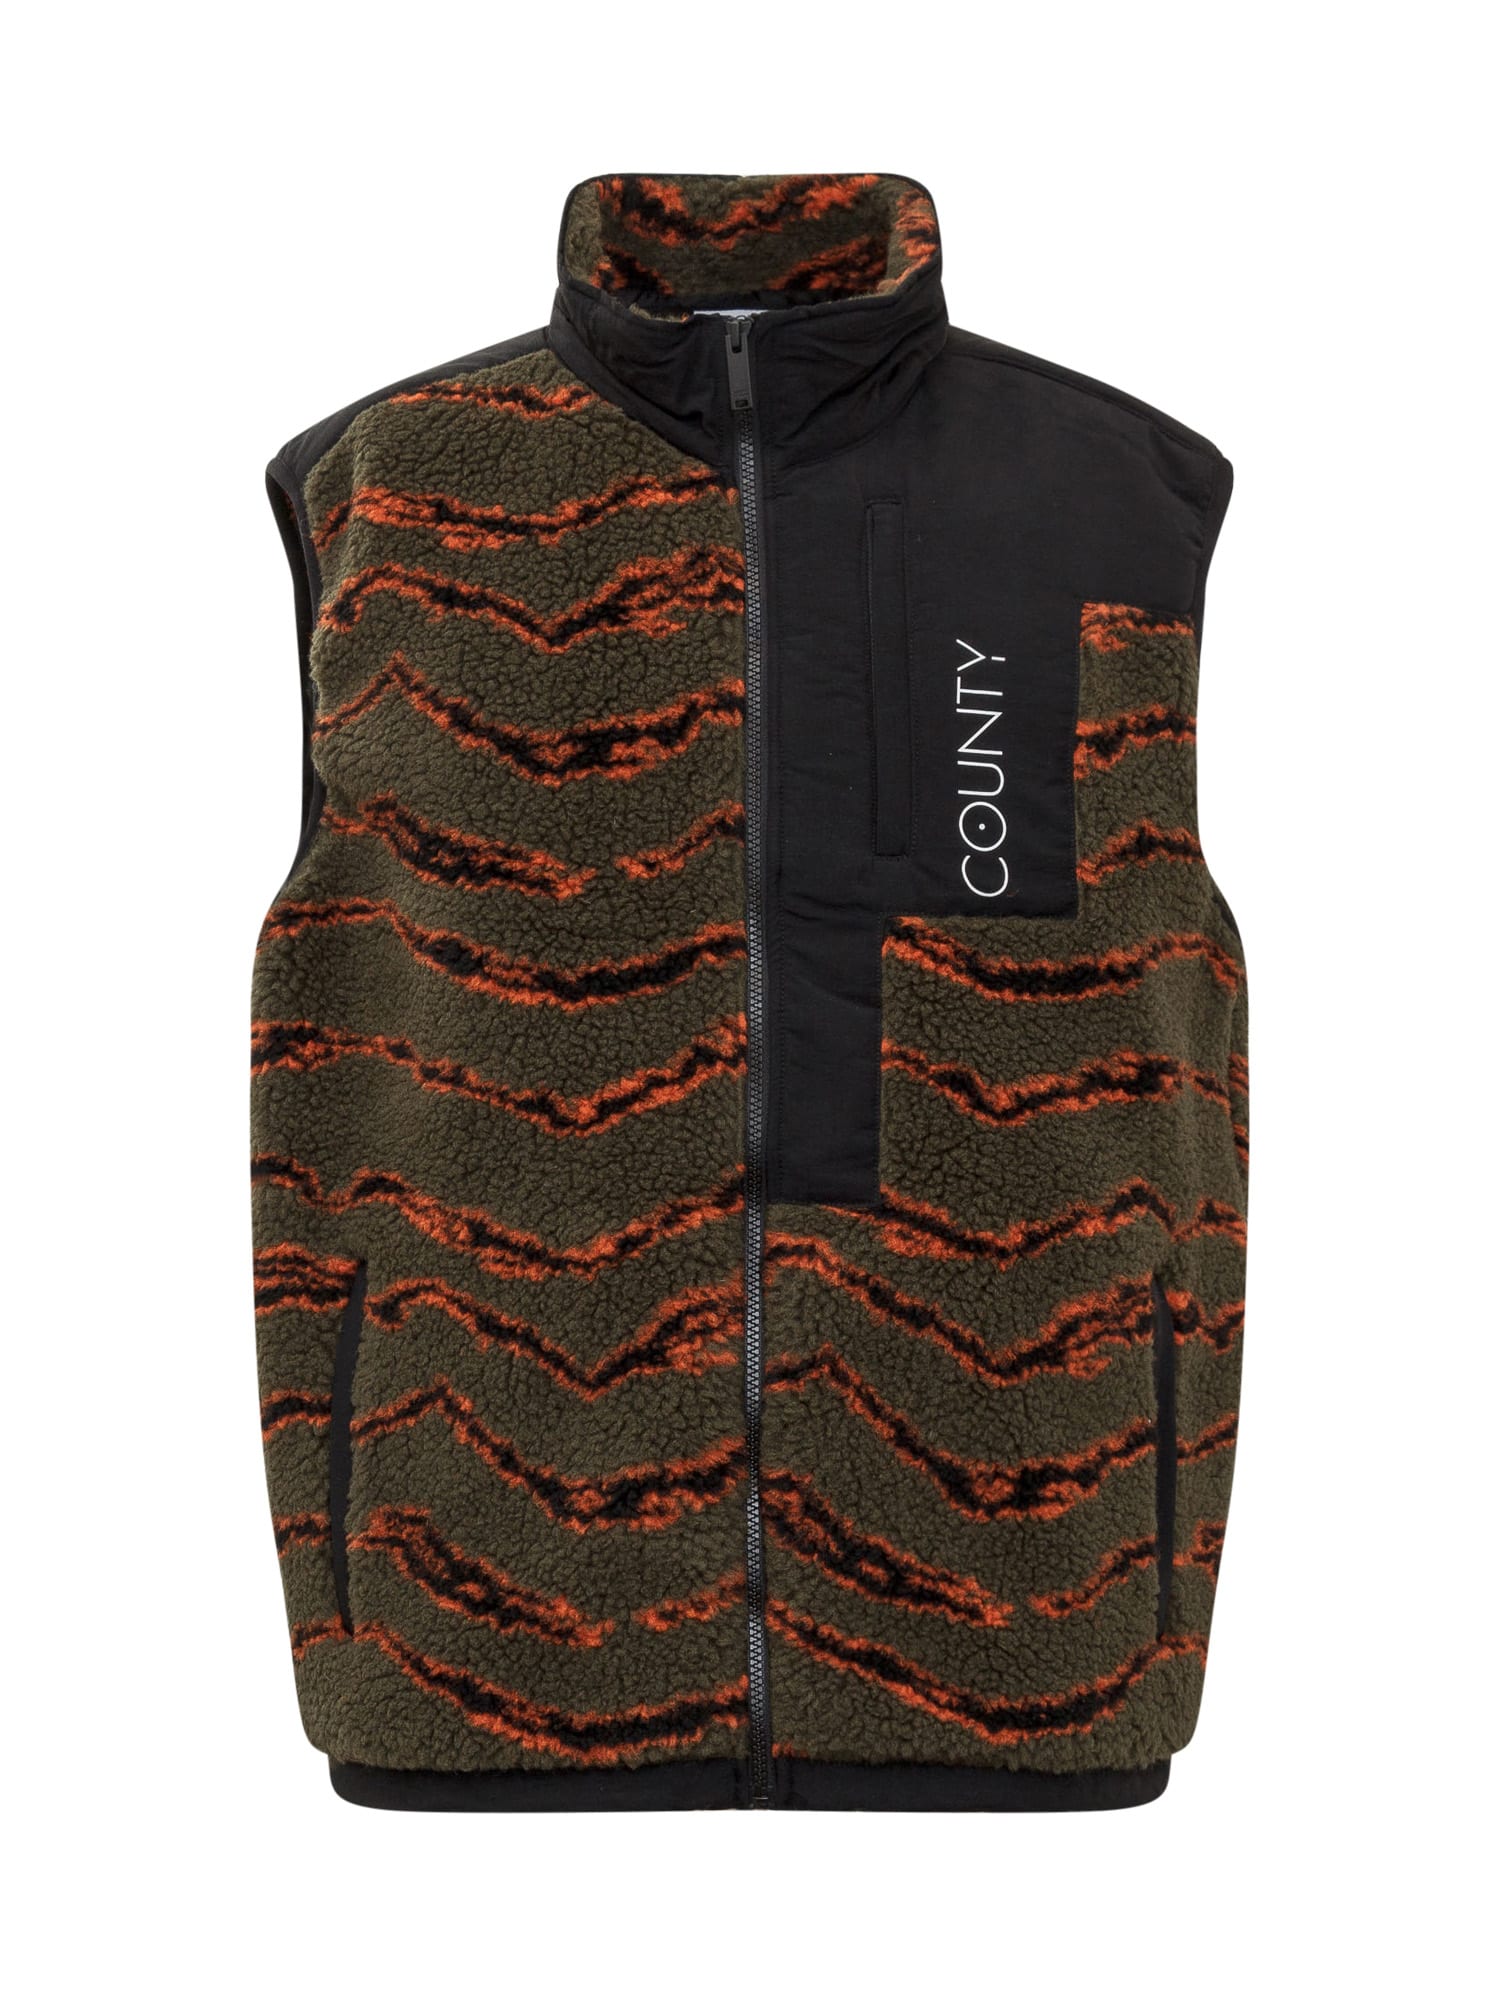 MARCELO BURLON COUNTY OF MILAN ALL-OVER CAMOUFLAGE JACKET